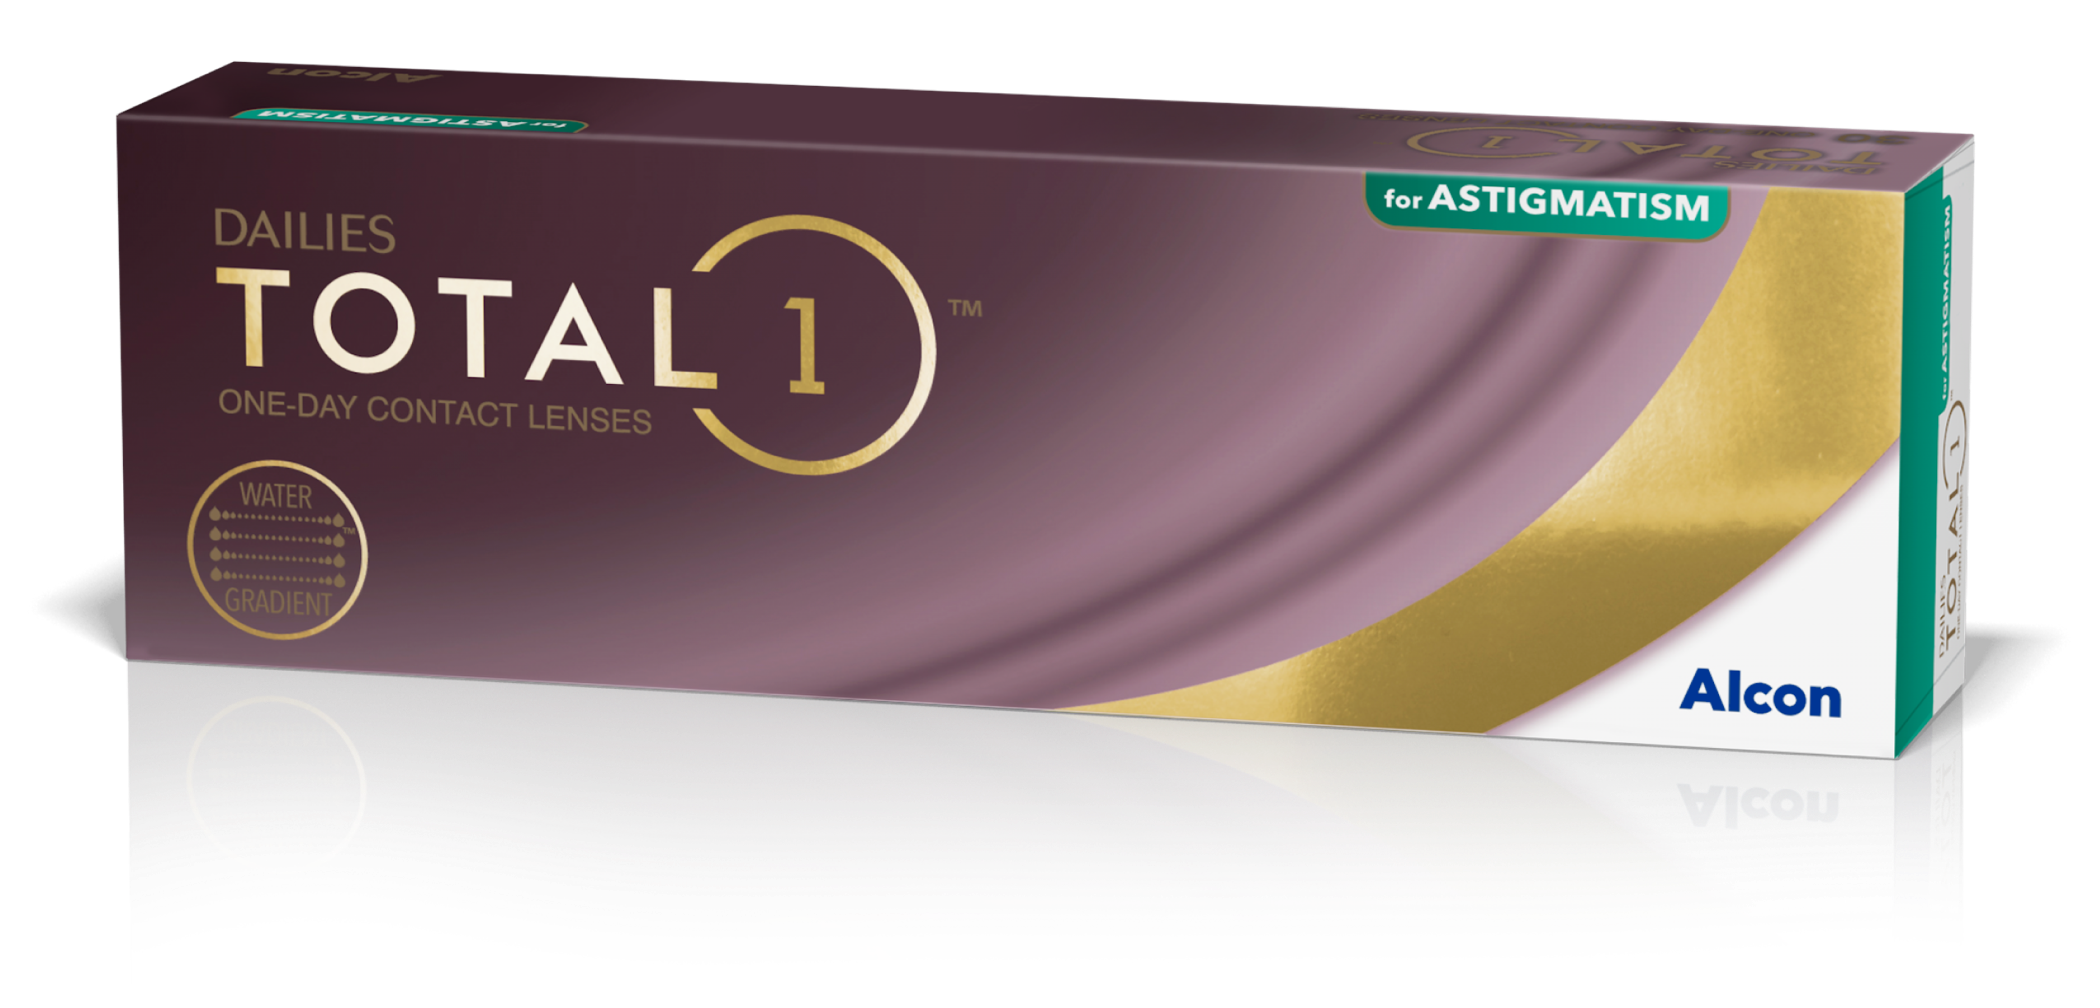 DAILIES TOTAL1® for Astigmatism pack shot